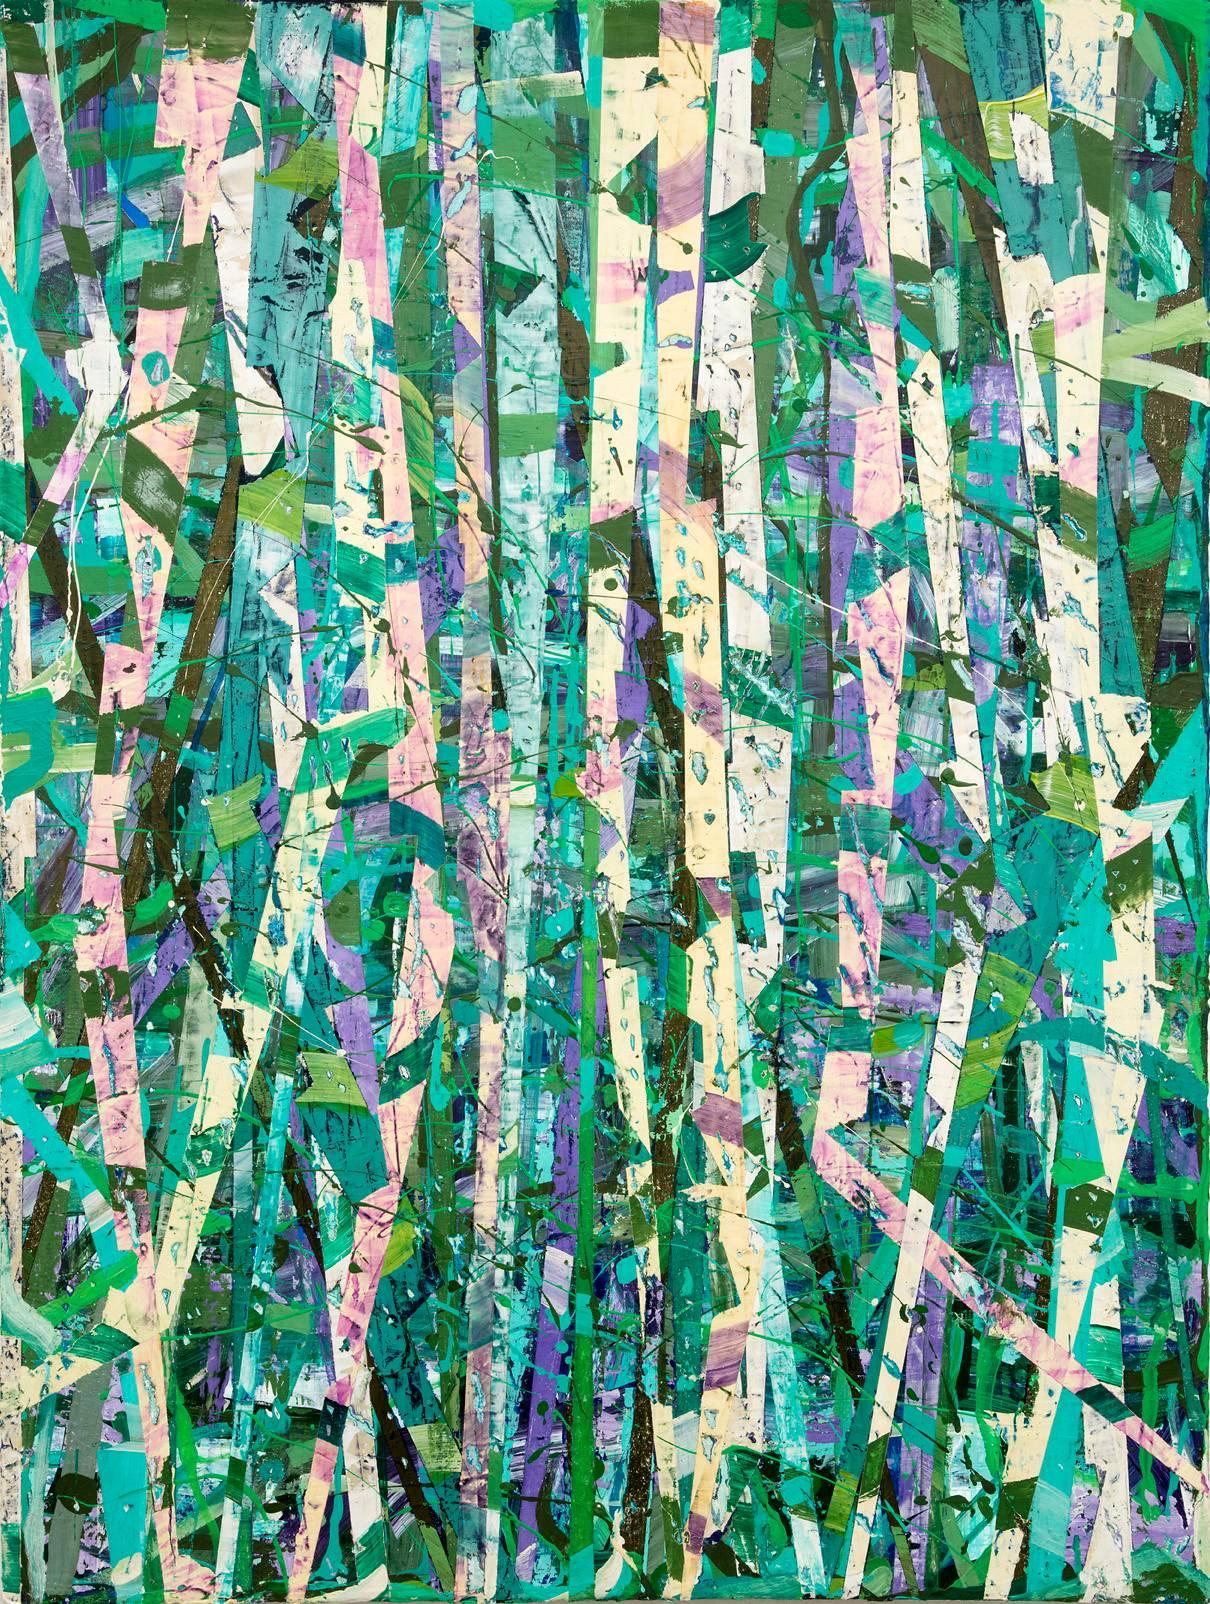 Taghkanic Creek, May 14 (Modern Abstract Painting on Canvas in Green & Teal) - Mixed Media Art by Vincent Pomilio